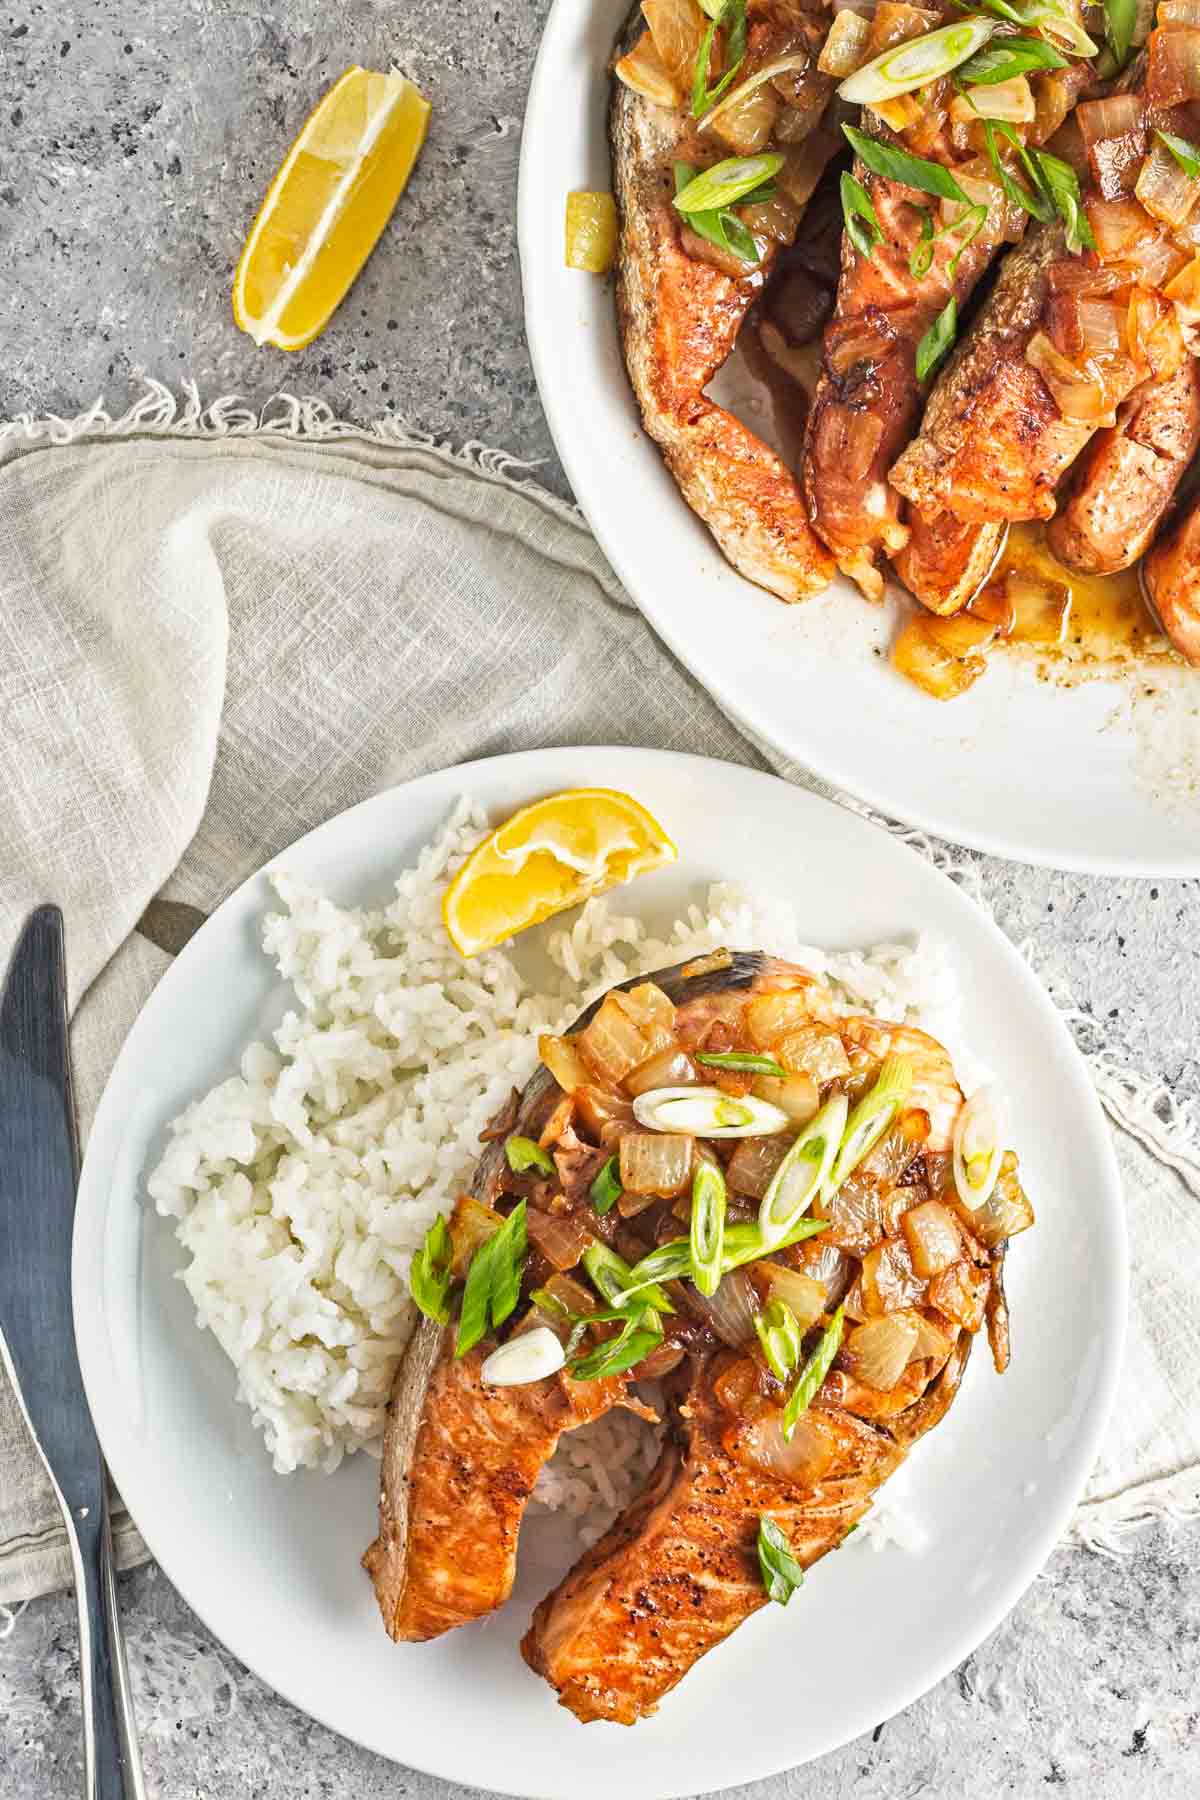 Plates of rice with pan-fried salmon steaks.